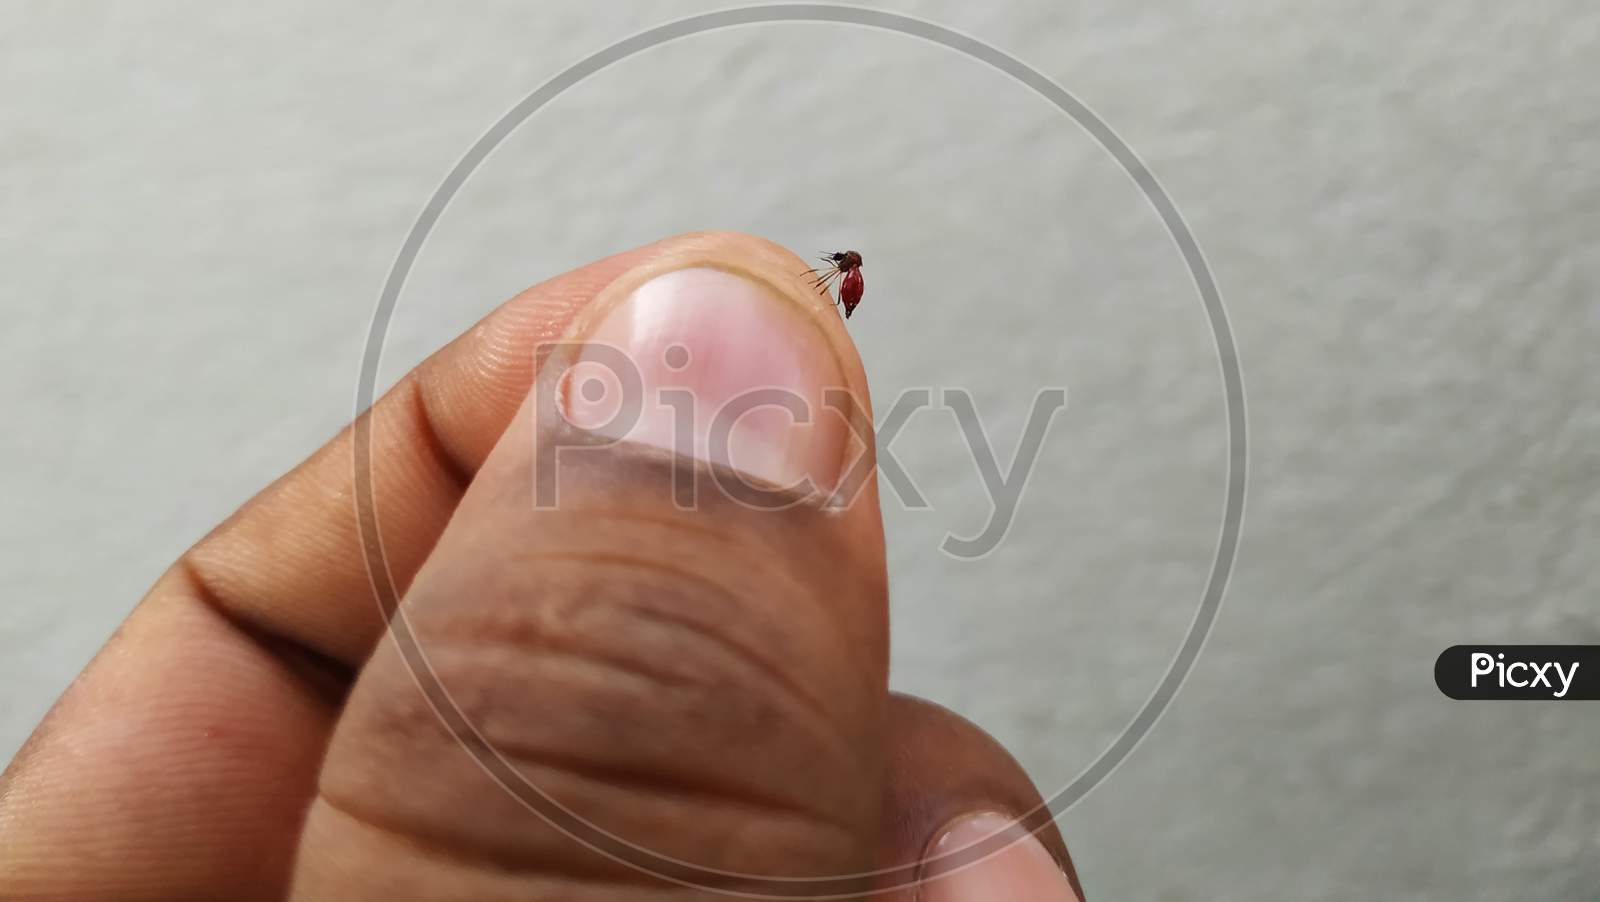 Mosquito Stomach Full Loaded With Blood Holding In A Hand Isolated On White Background